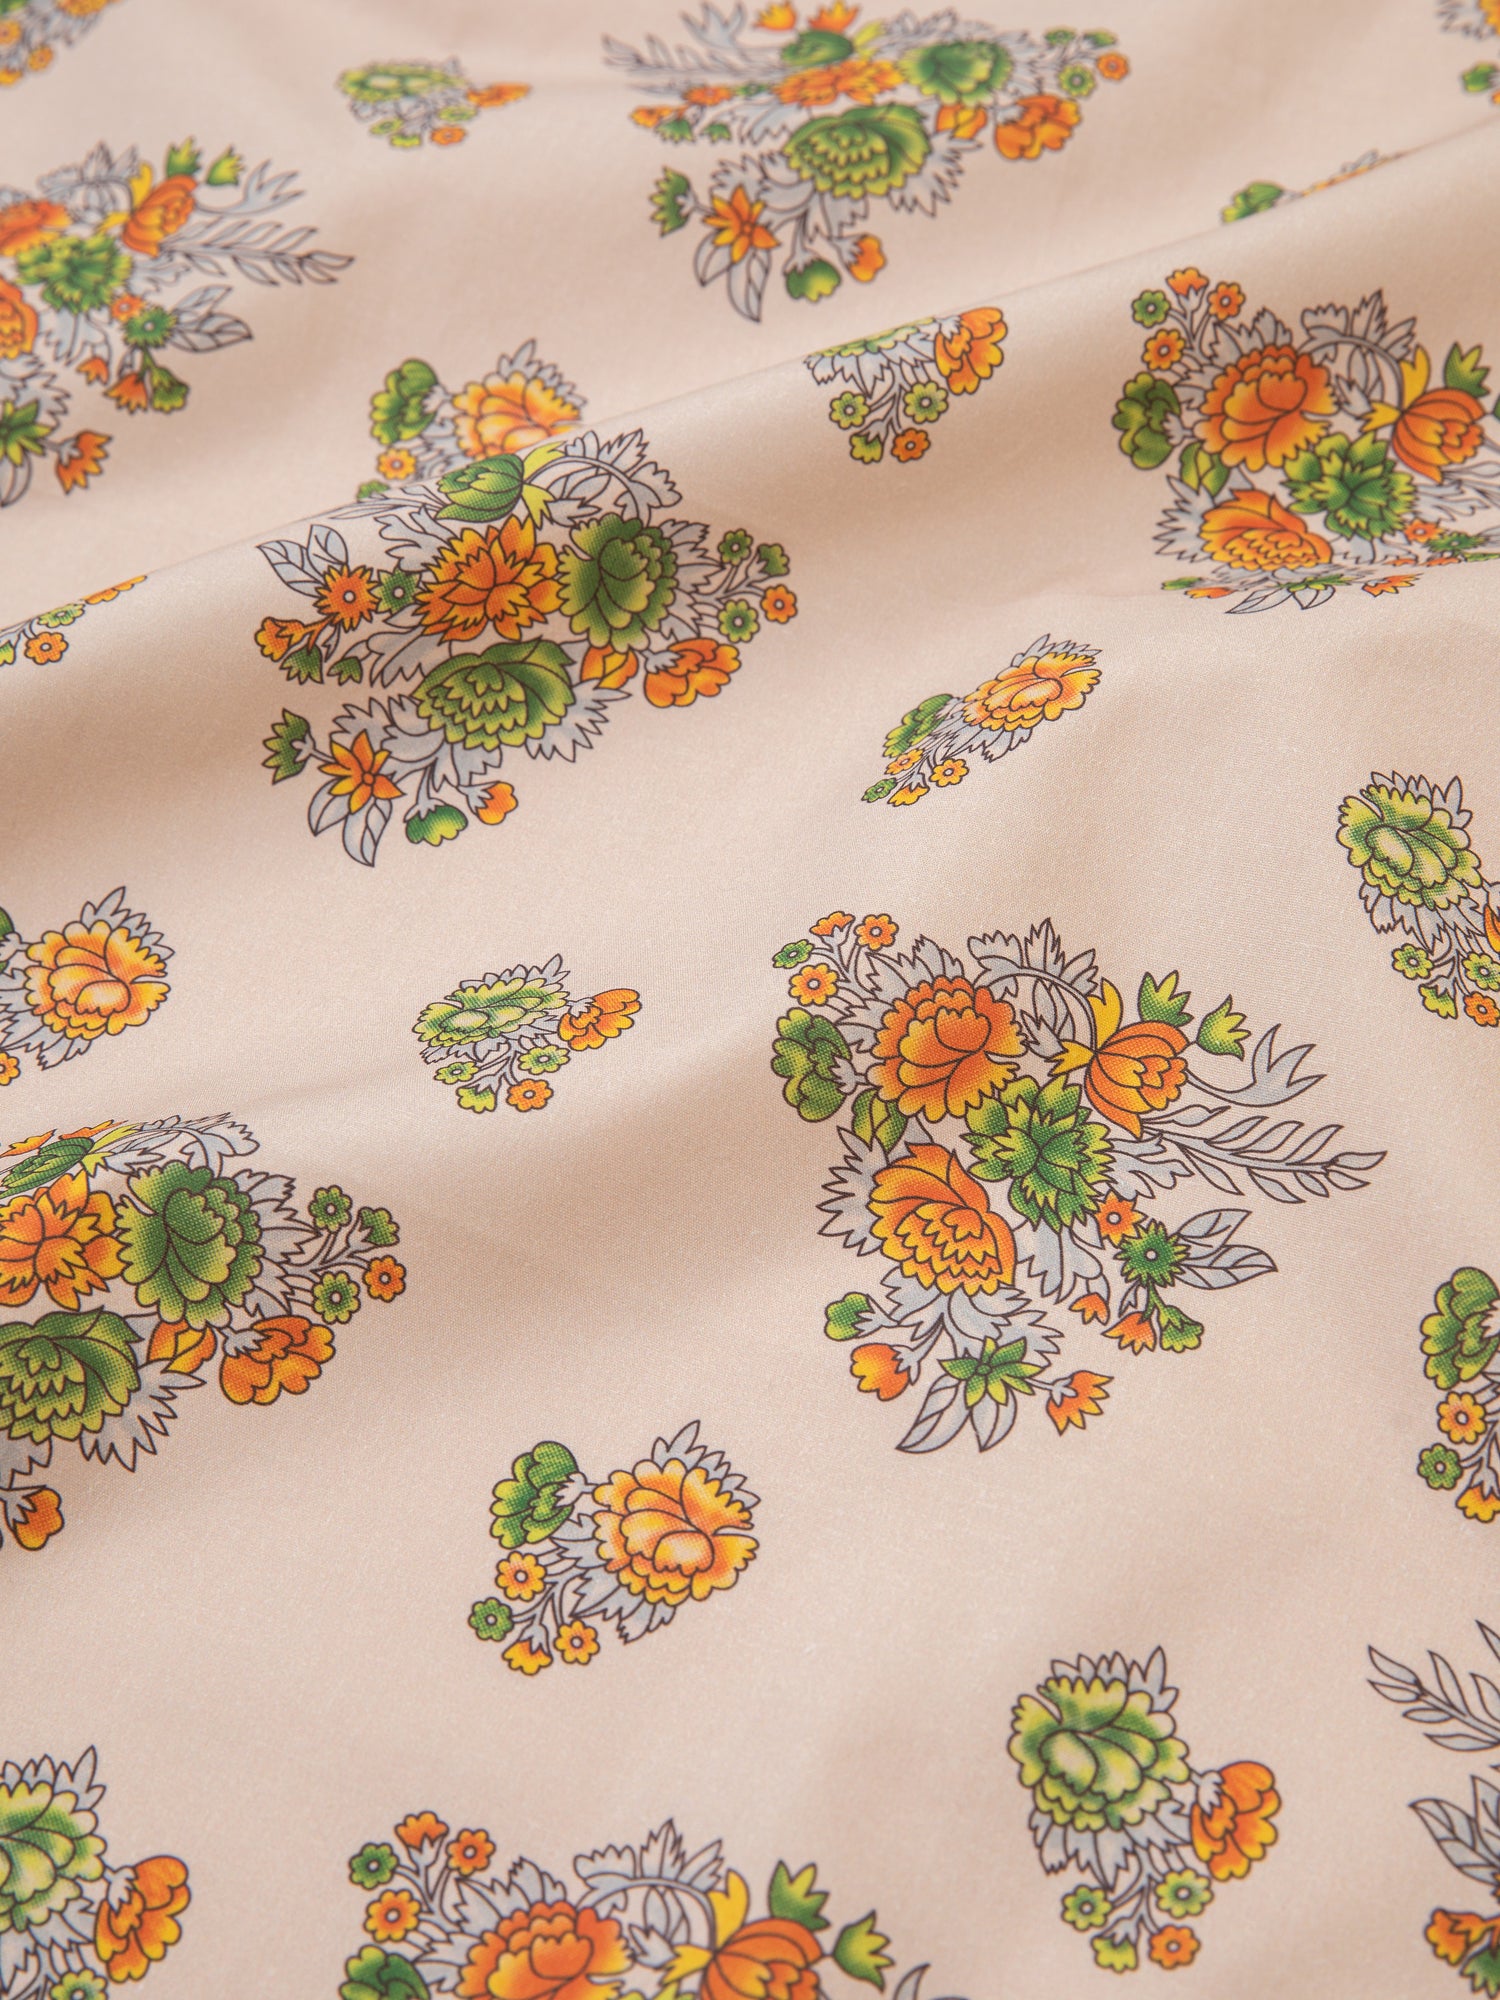 An orange and yellow Found Floral Print Bandana with motifs inspired by nature.